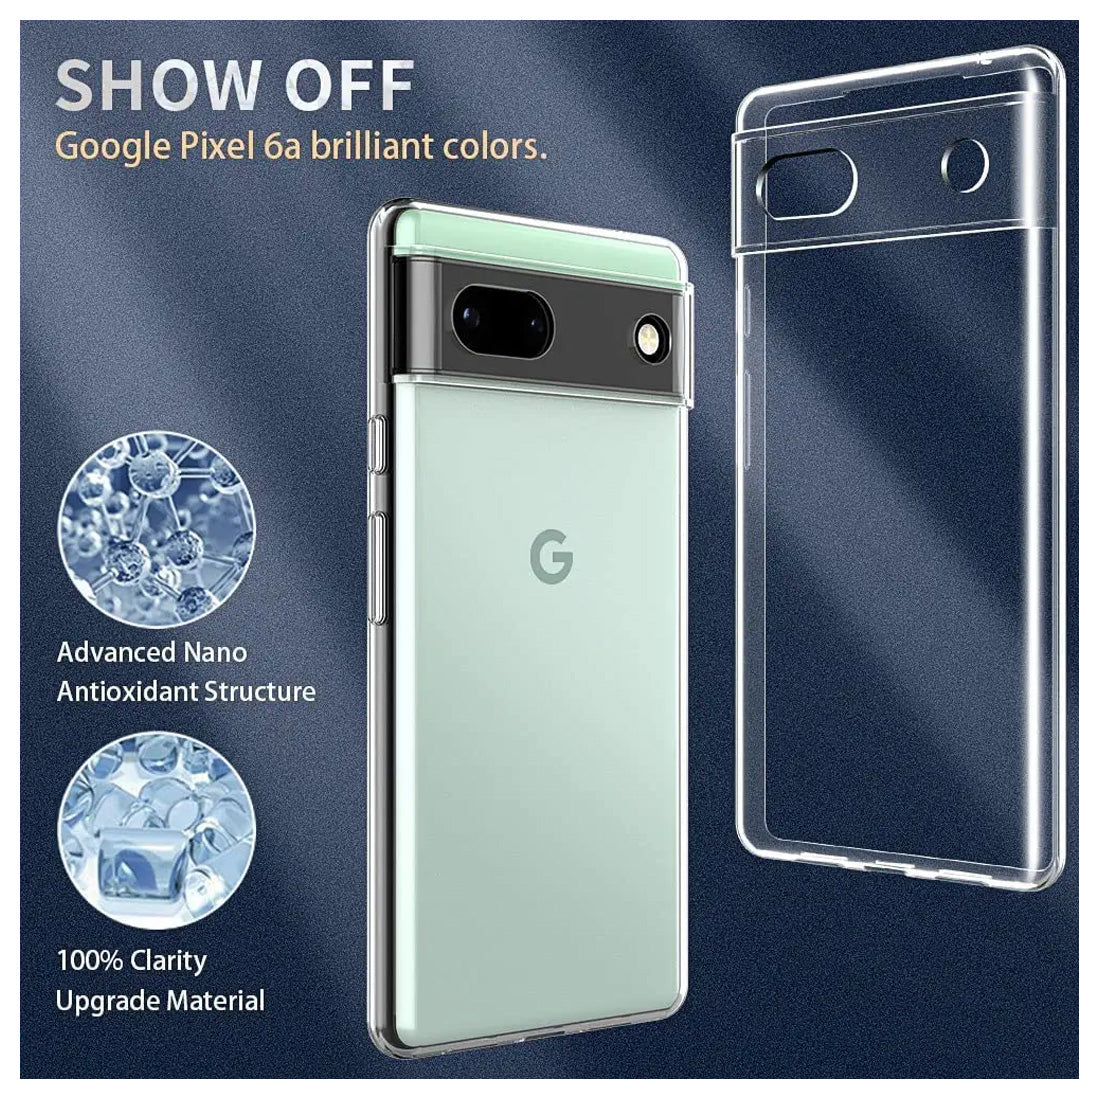 Clear Case for Google Pixel 6a 5G